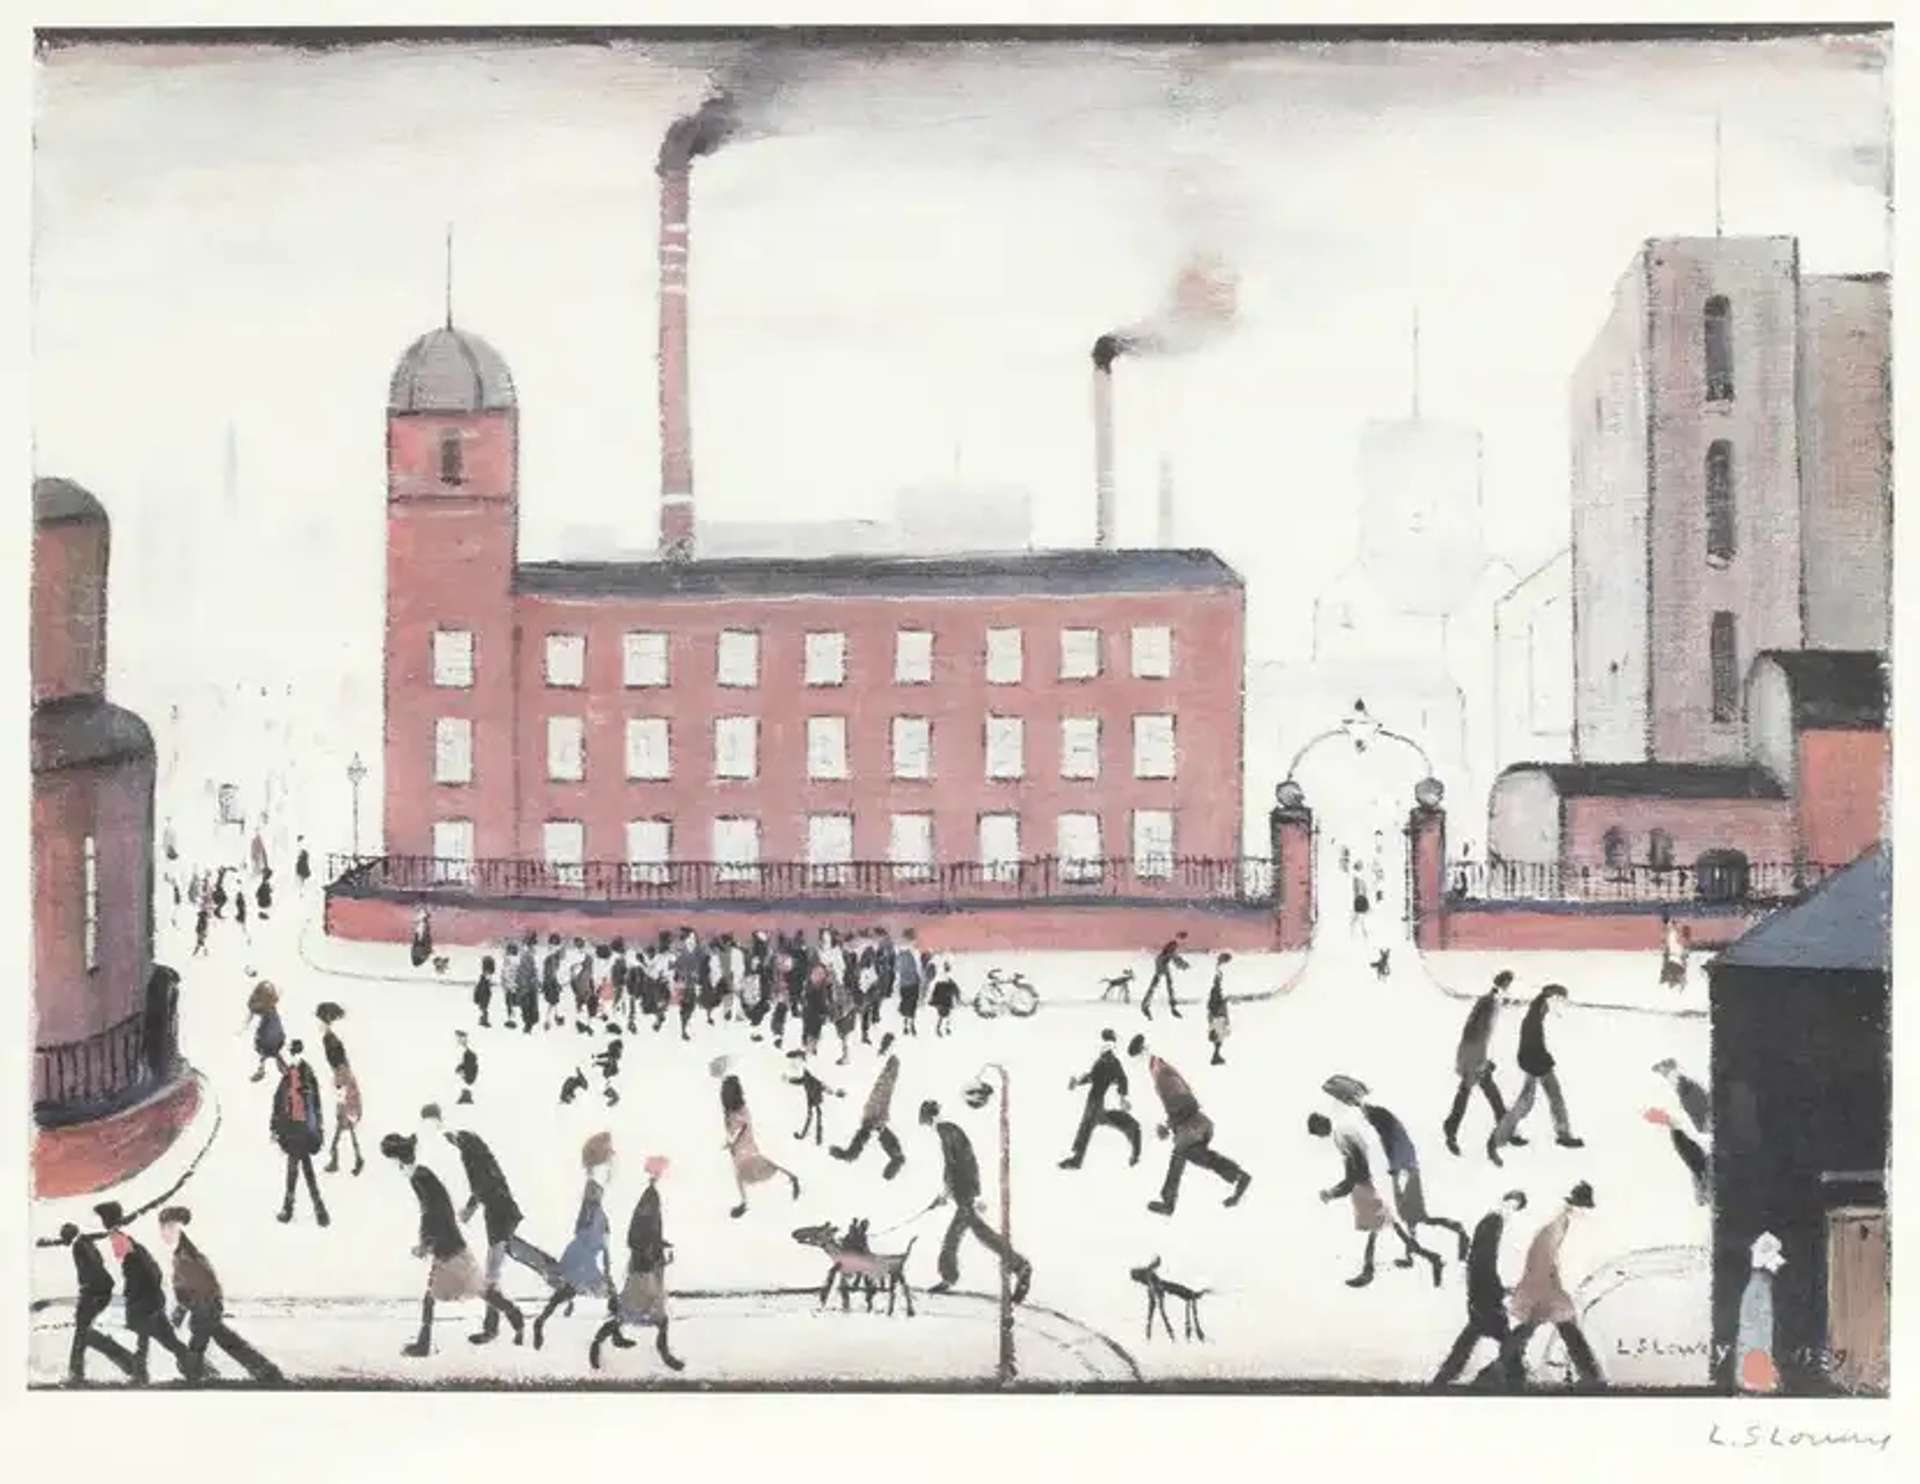 L. S. Lowry and the Industrial North